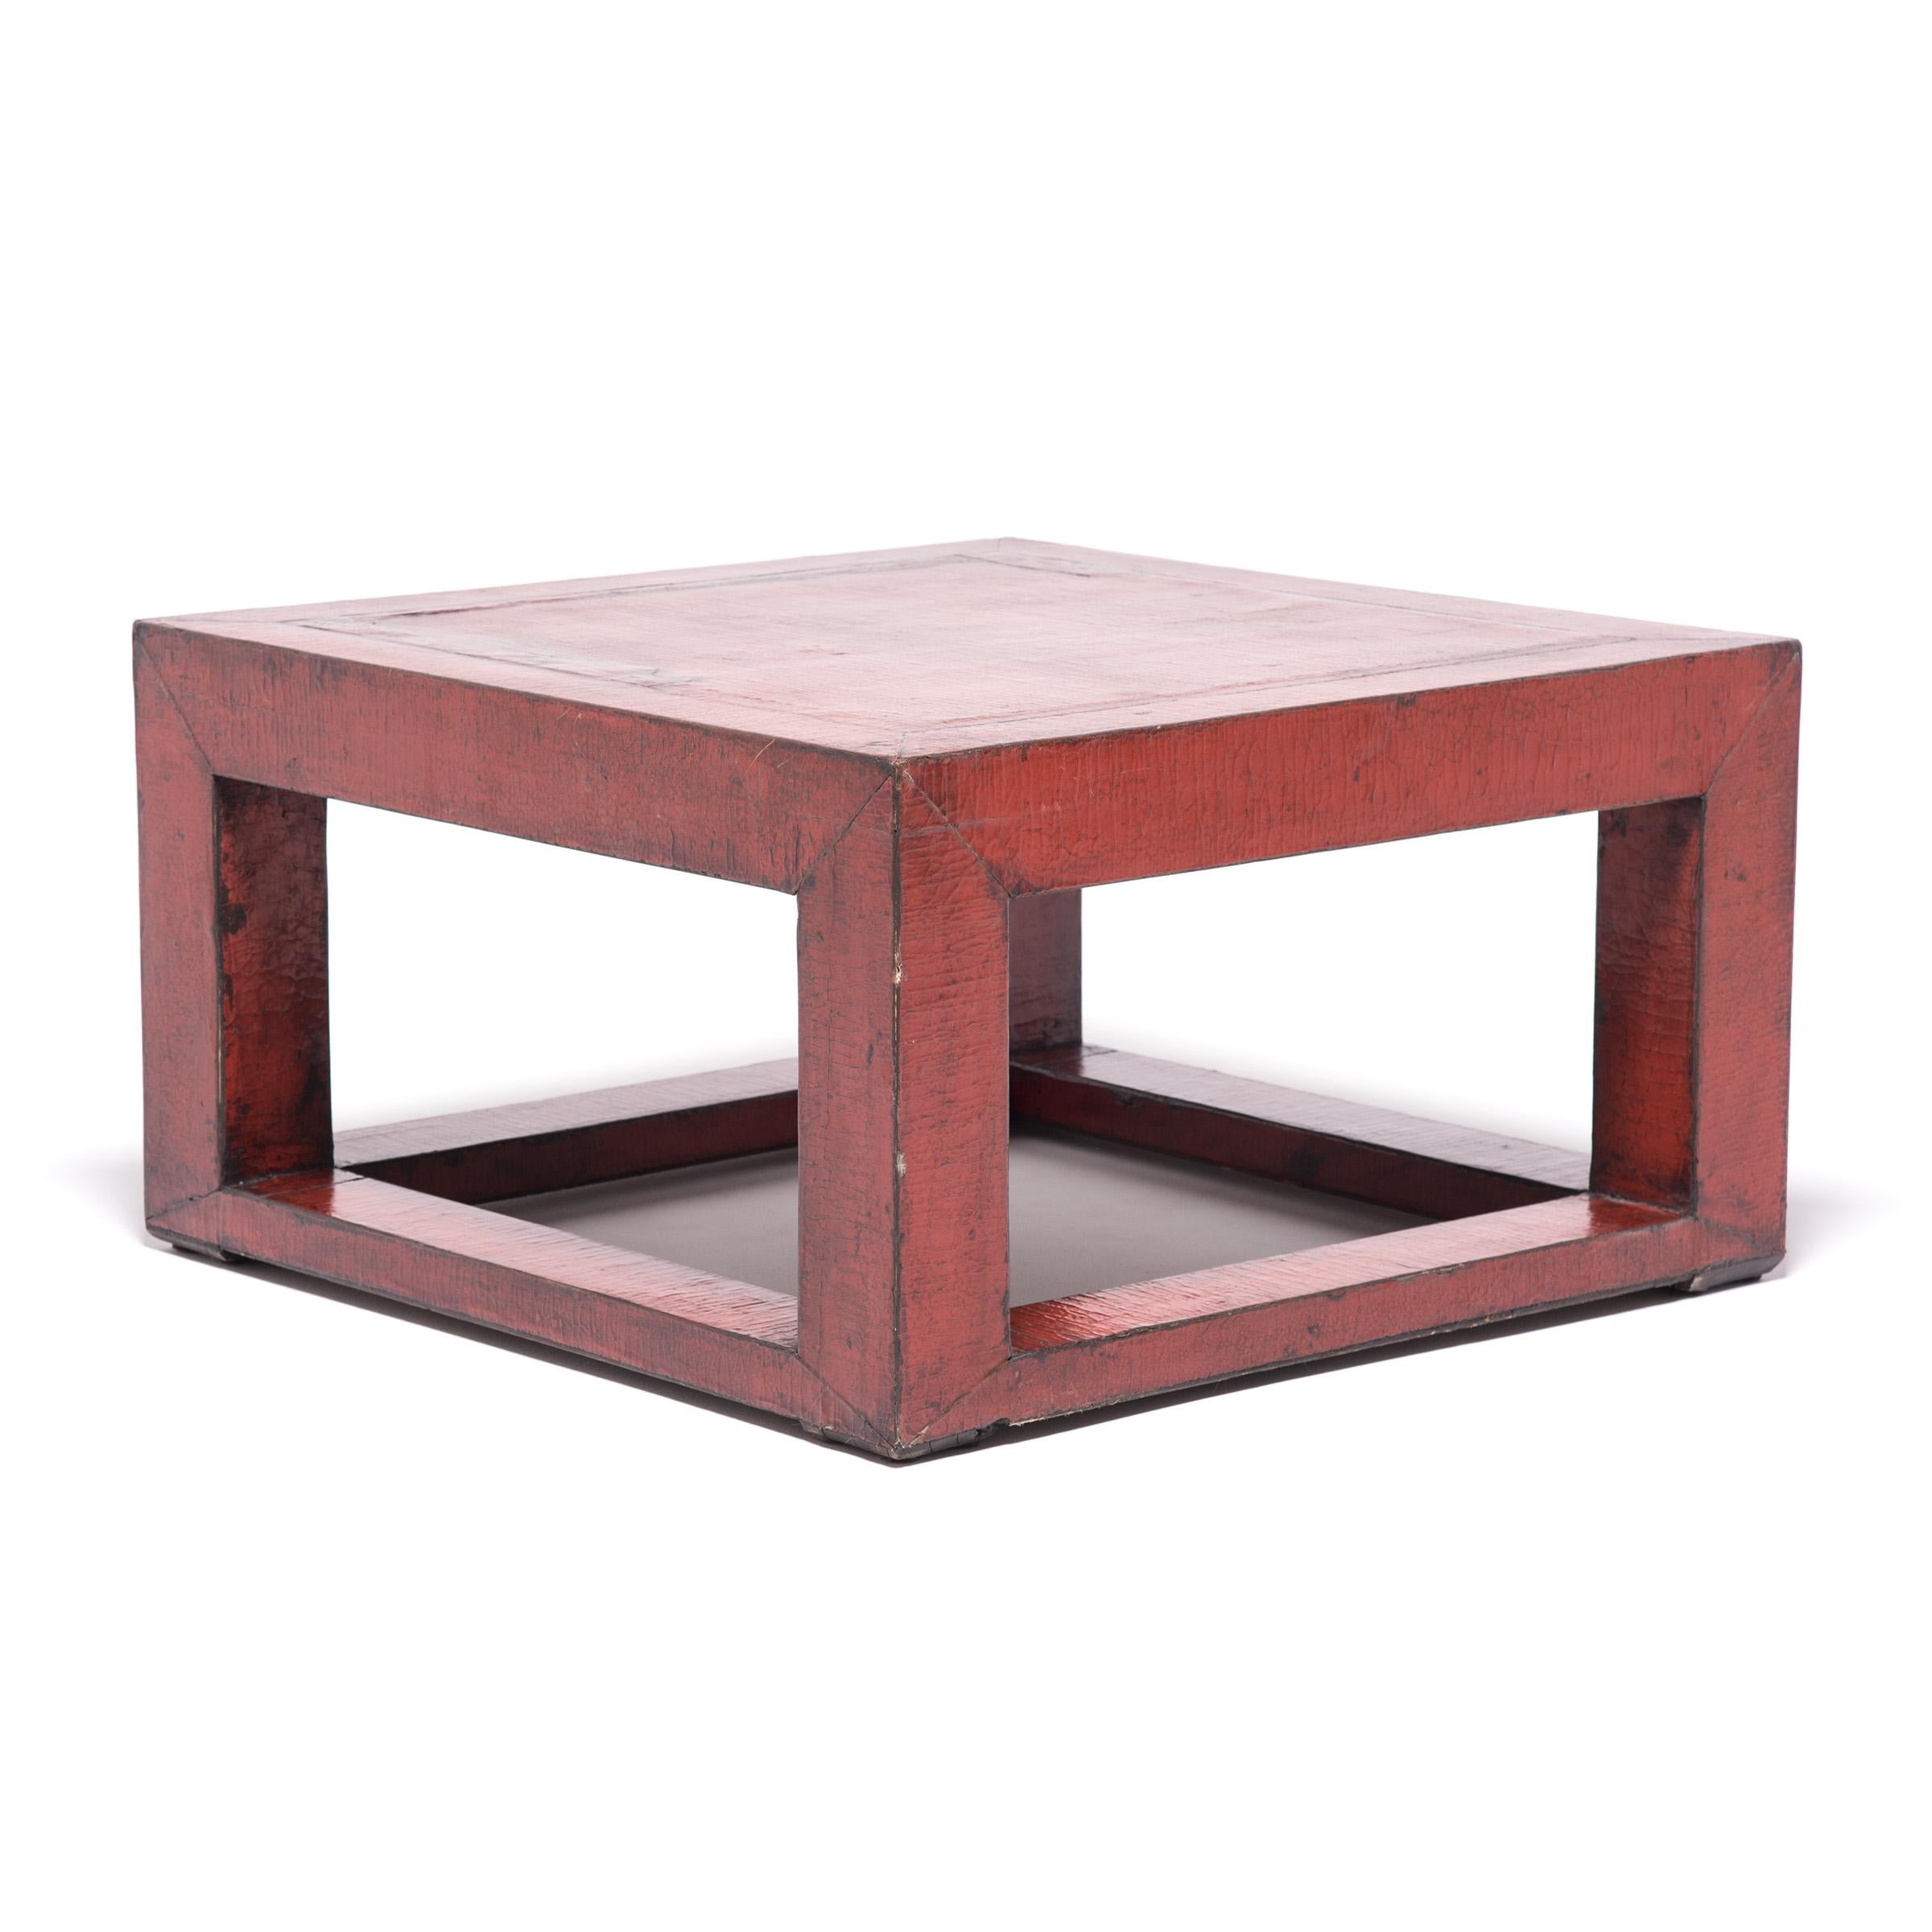 Chinese Red Lacquer Square Platform Table